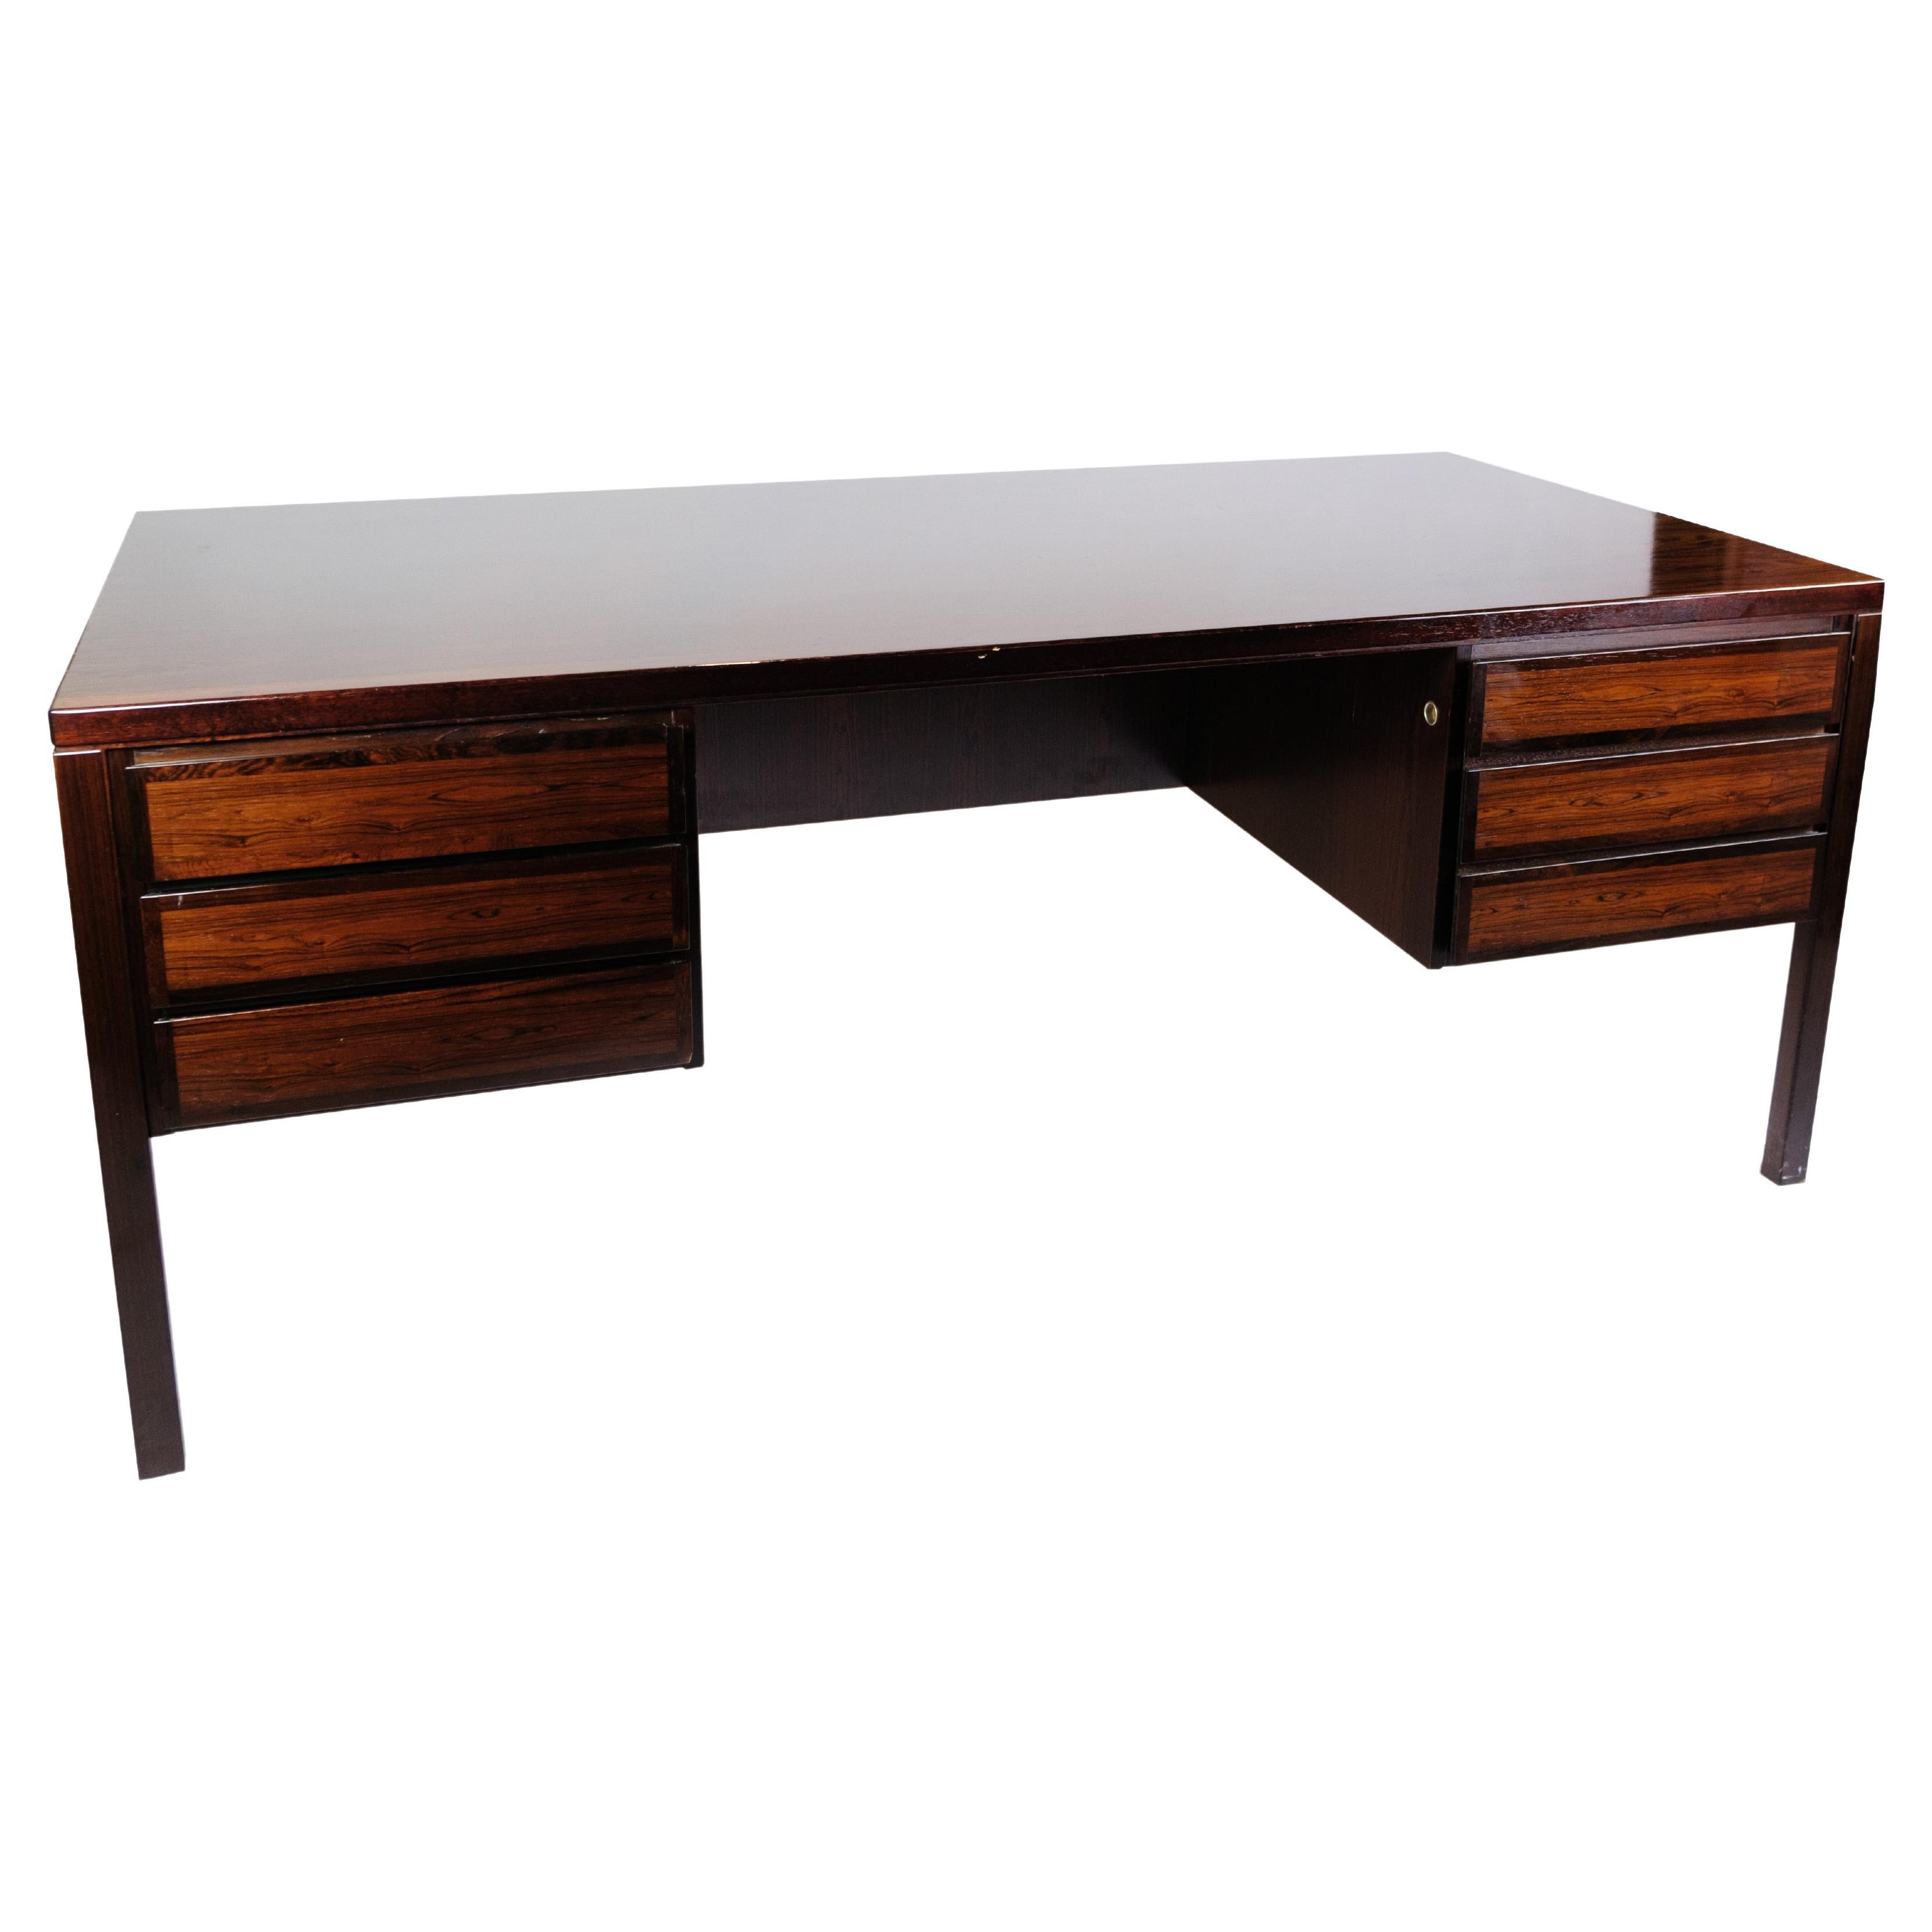 Desk Made In Rosewood By Omann Jun. Furniture Factory From 1960s